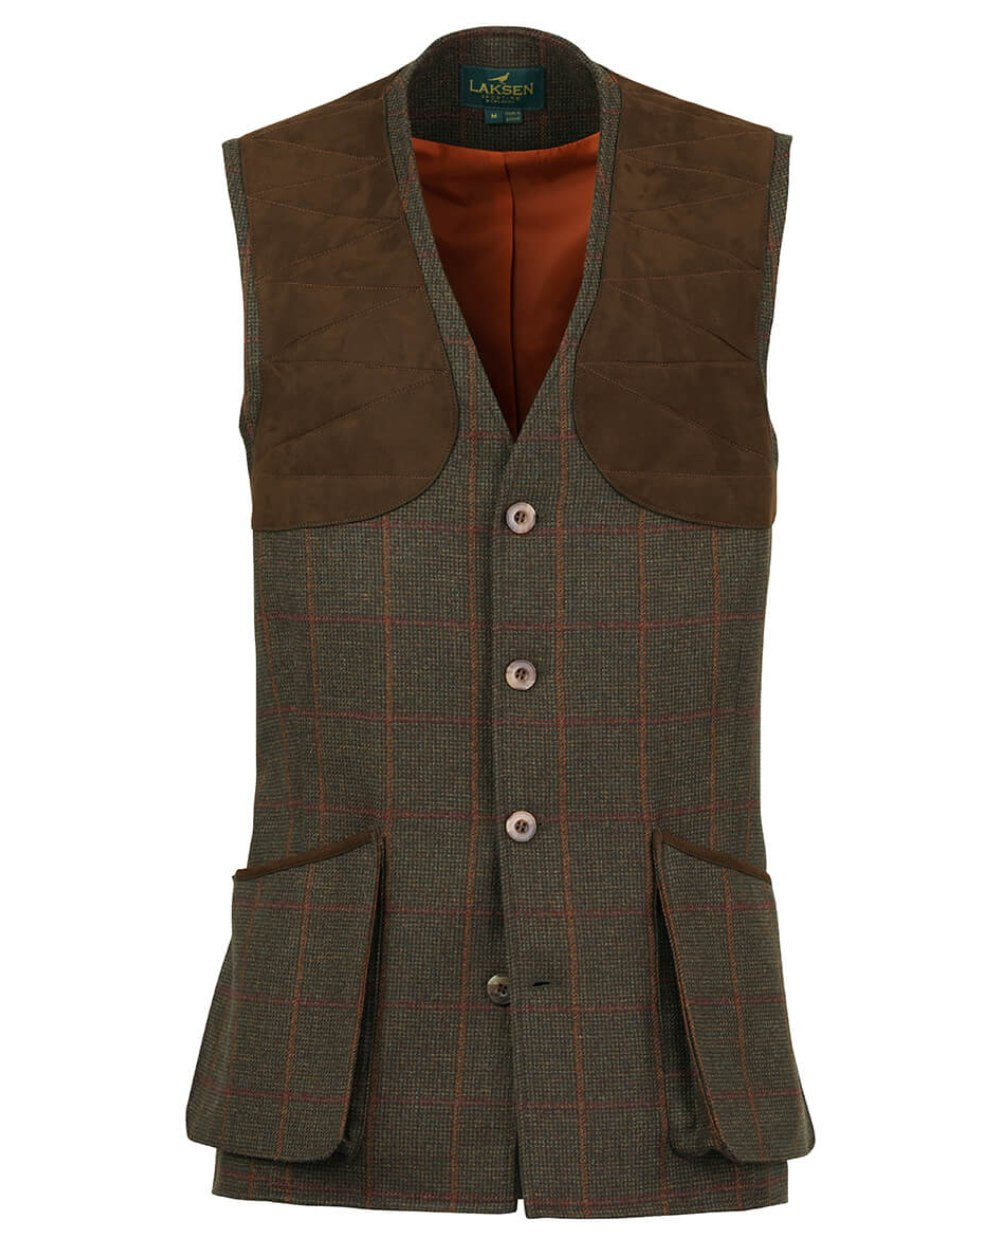 Laksen Hastings Leith Shooting Vest On A White Background